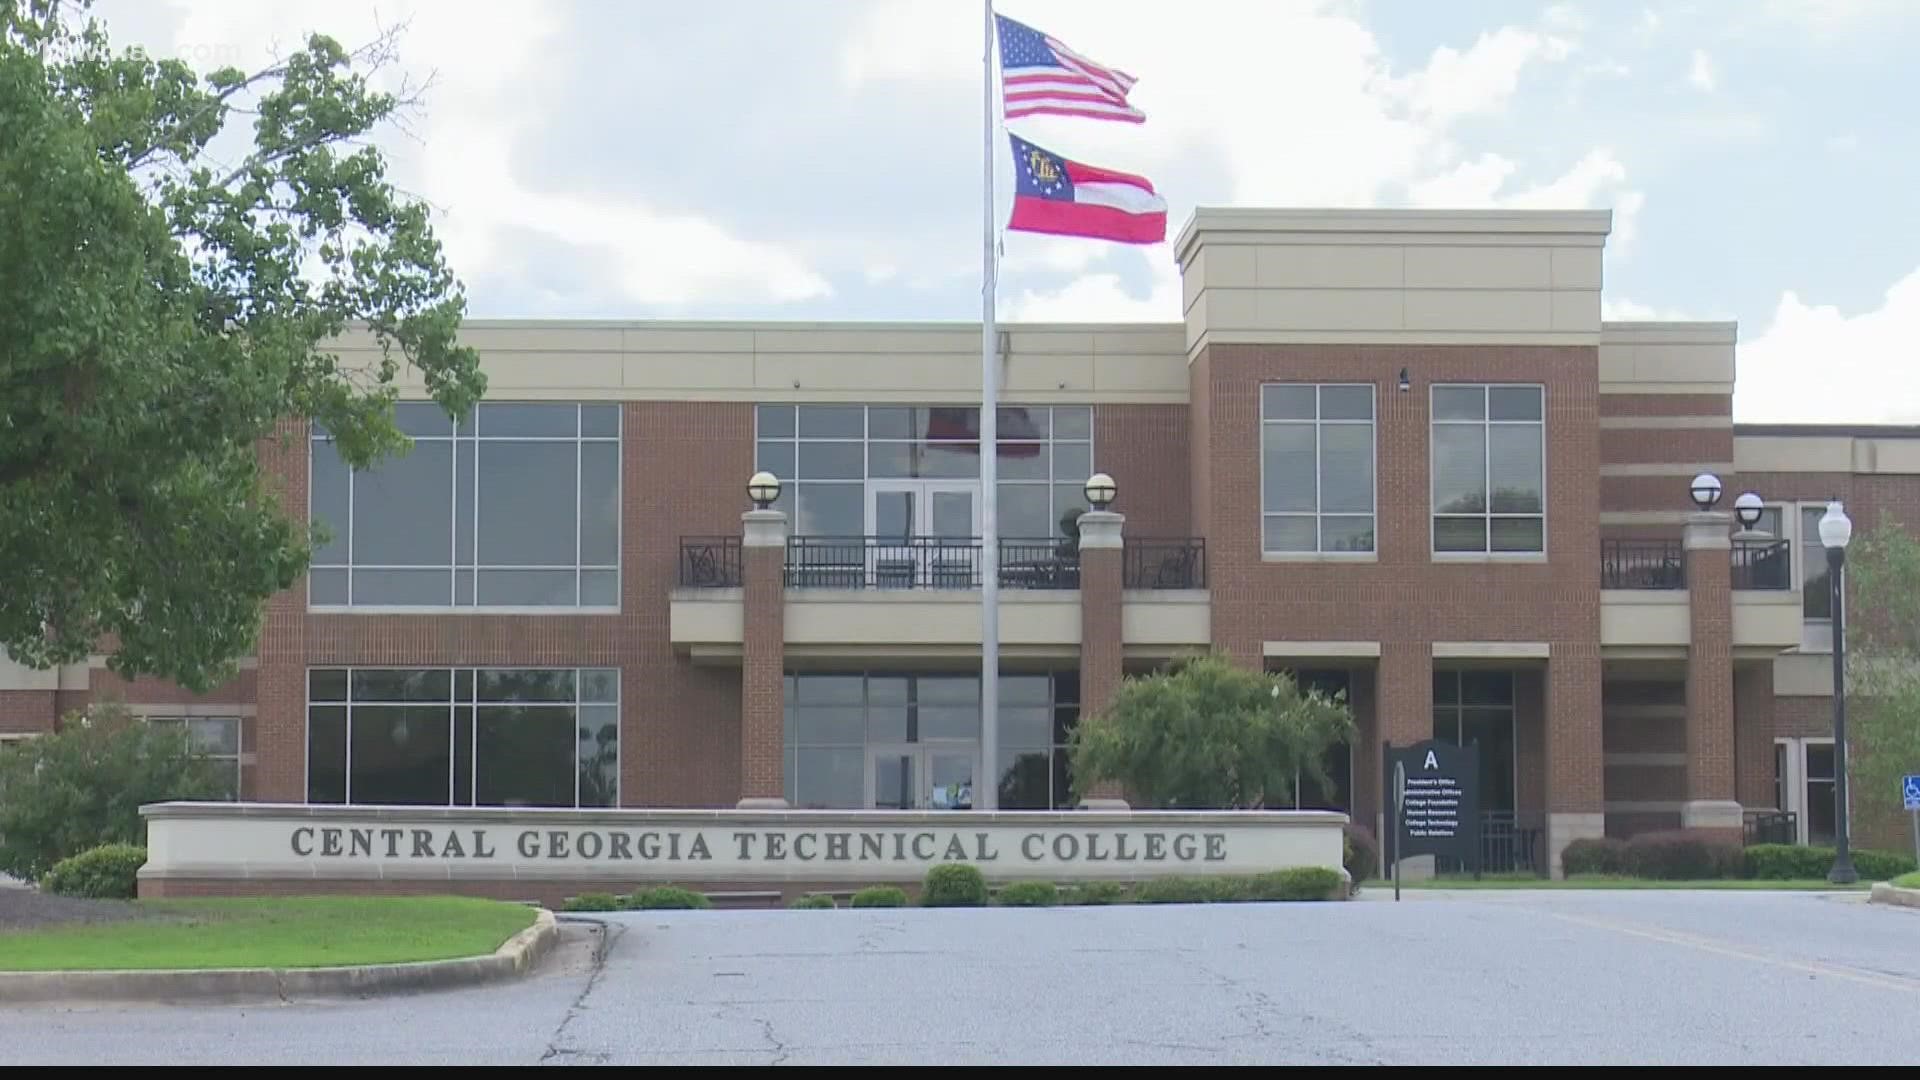 3-2-1 GO is additional funding that Central Georgia Technical College was able to secure to offset some of the costs that may not be covered by financial aid